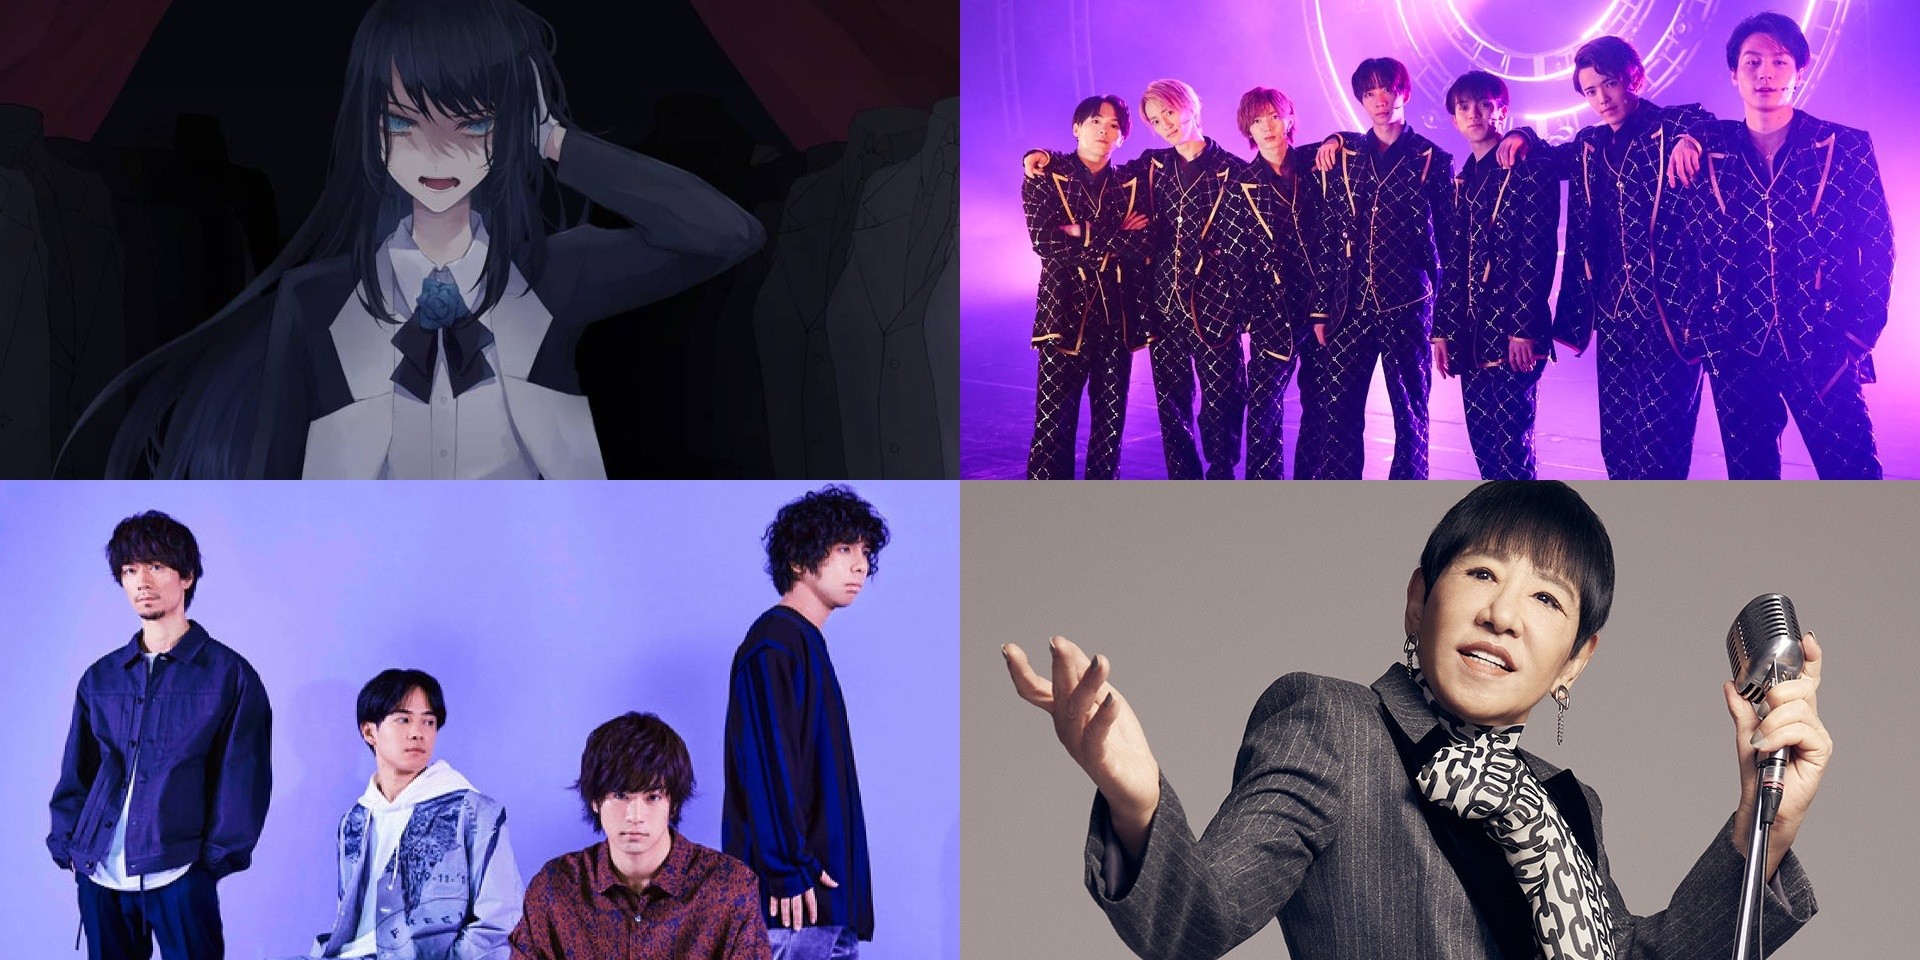 Travis Japan, Ado, Akiko Wada x Frederic, and more to appear at YouTube FanFest Japan 2021